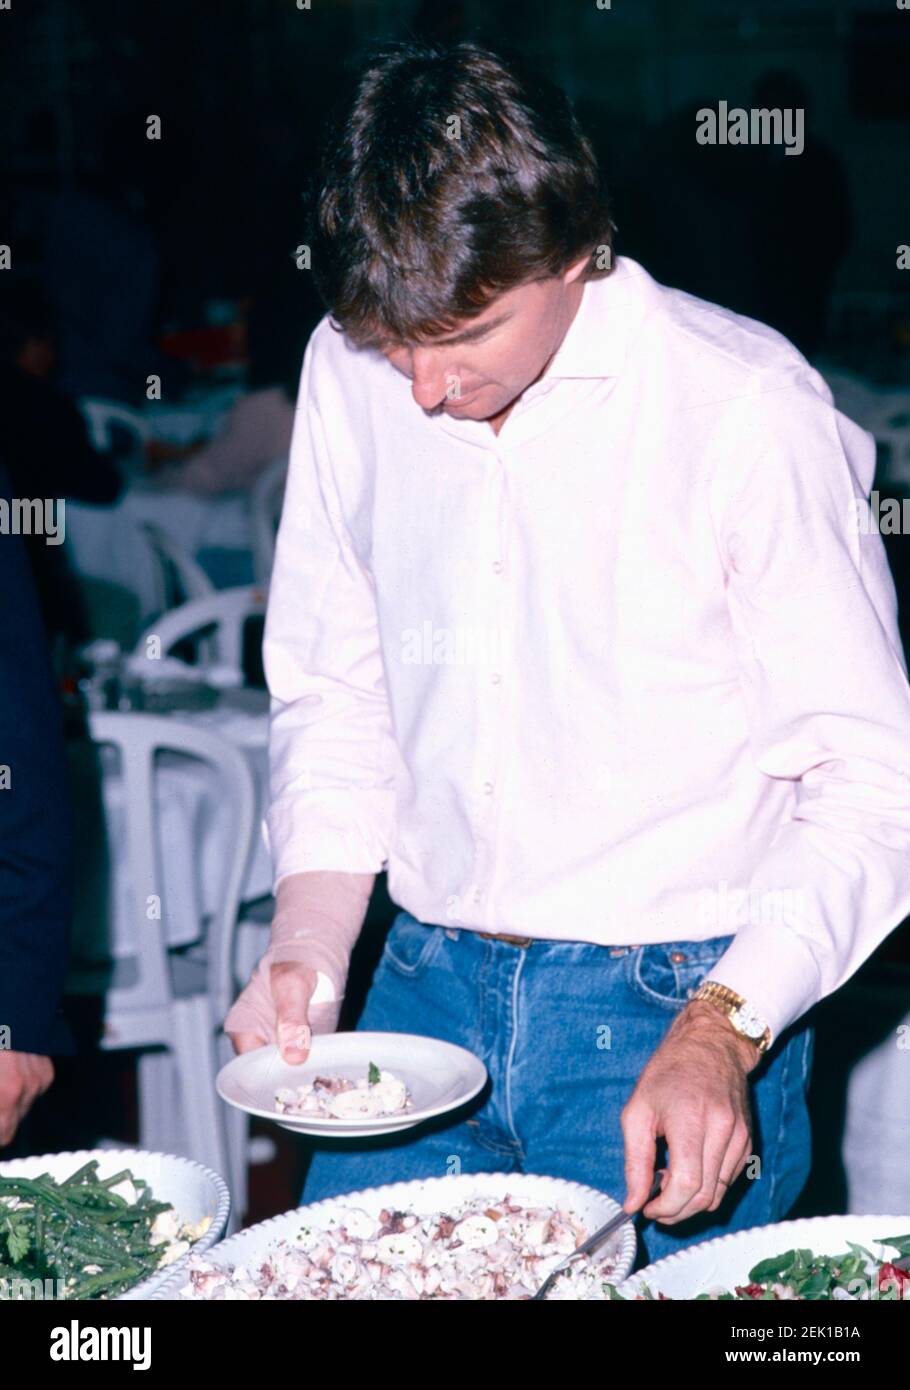 American tennis player Jimmy Connors, 1990s Stock Photo